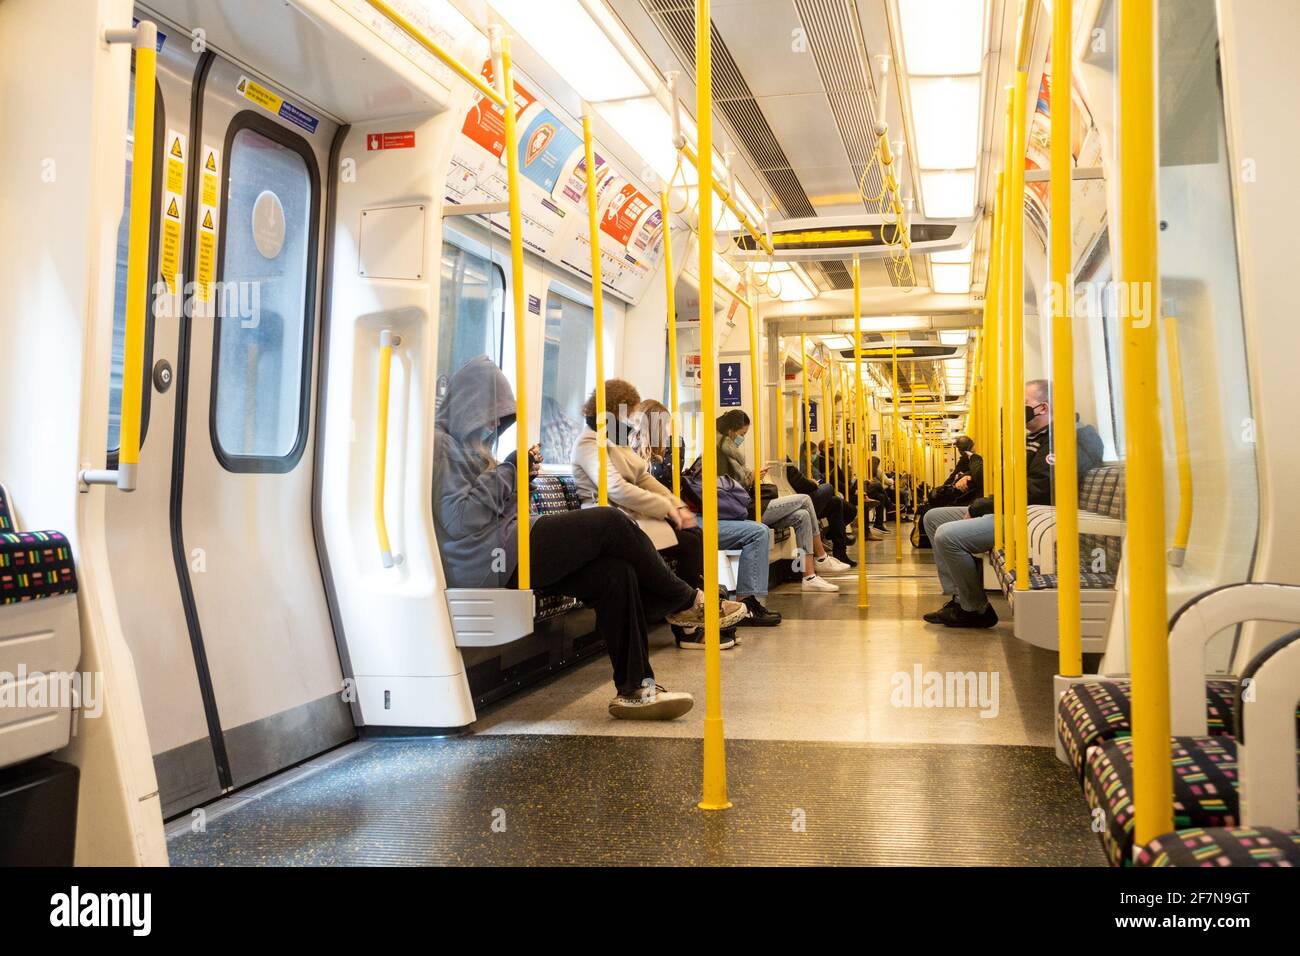 Onboard a London Underground train on the District Line. The train is relatively empty due to coronavirus and all passengers are seated. Stock Photo